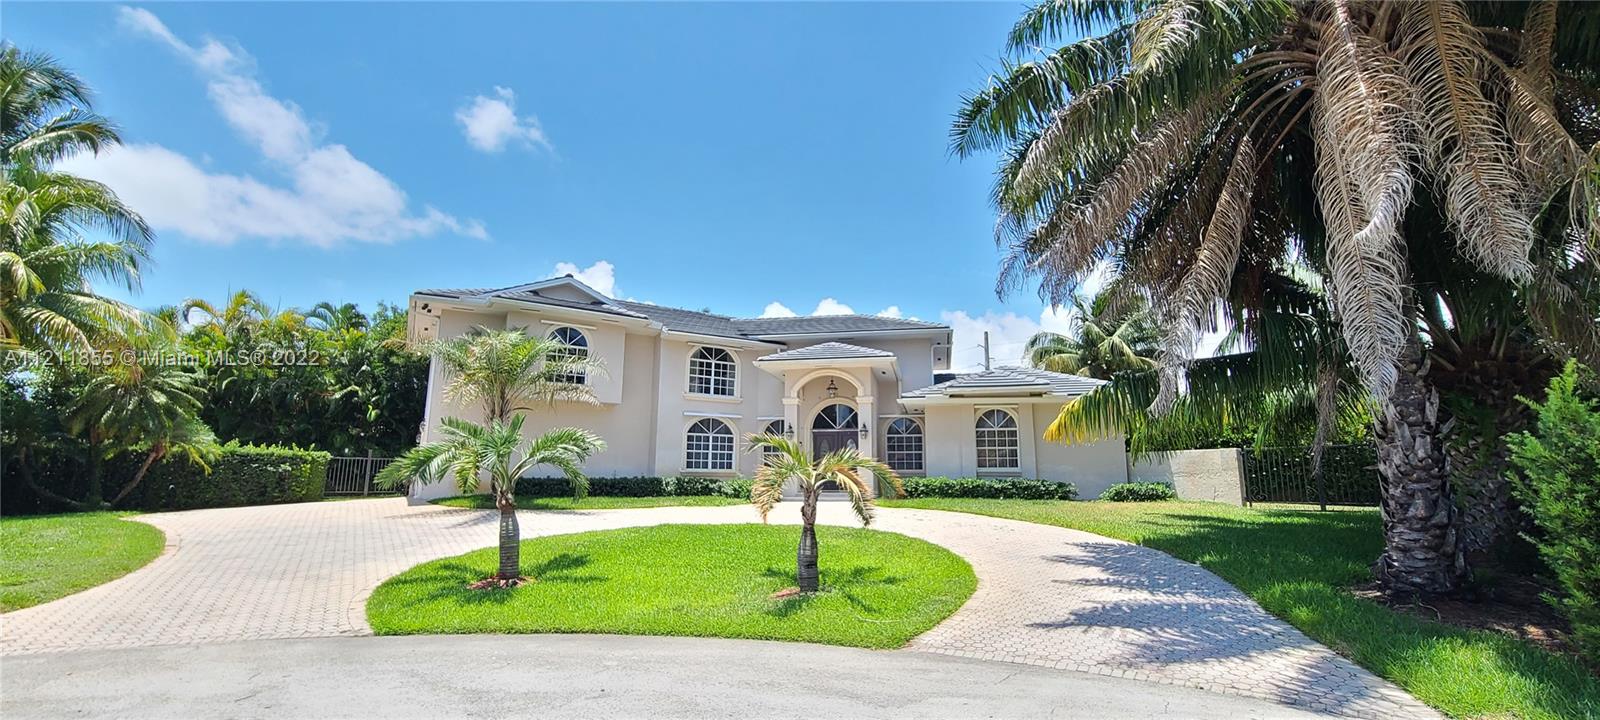 16414 SW 86th Ct, Palmetto Bay, Florida 33157, 4 Bedrooms Bedrooms, ,4 BathroomsBathrooms,Residentiallease,For Rent,16414 SW 86th Ct,A11211855